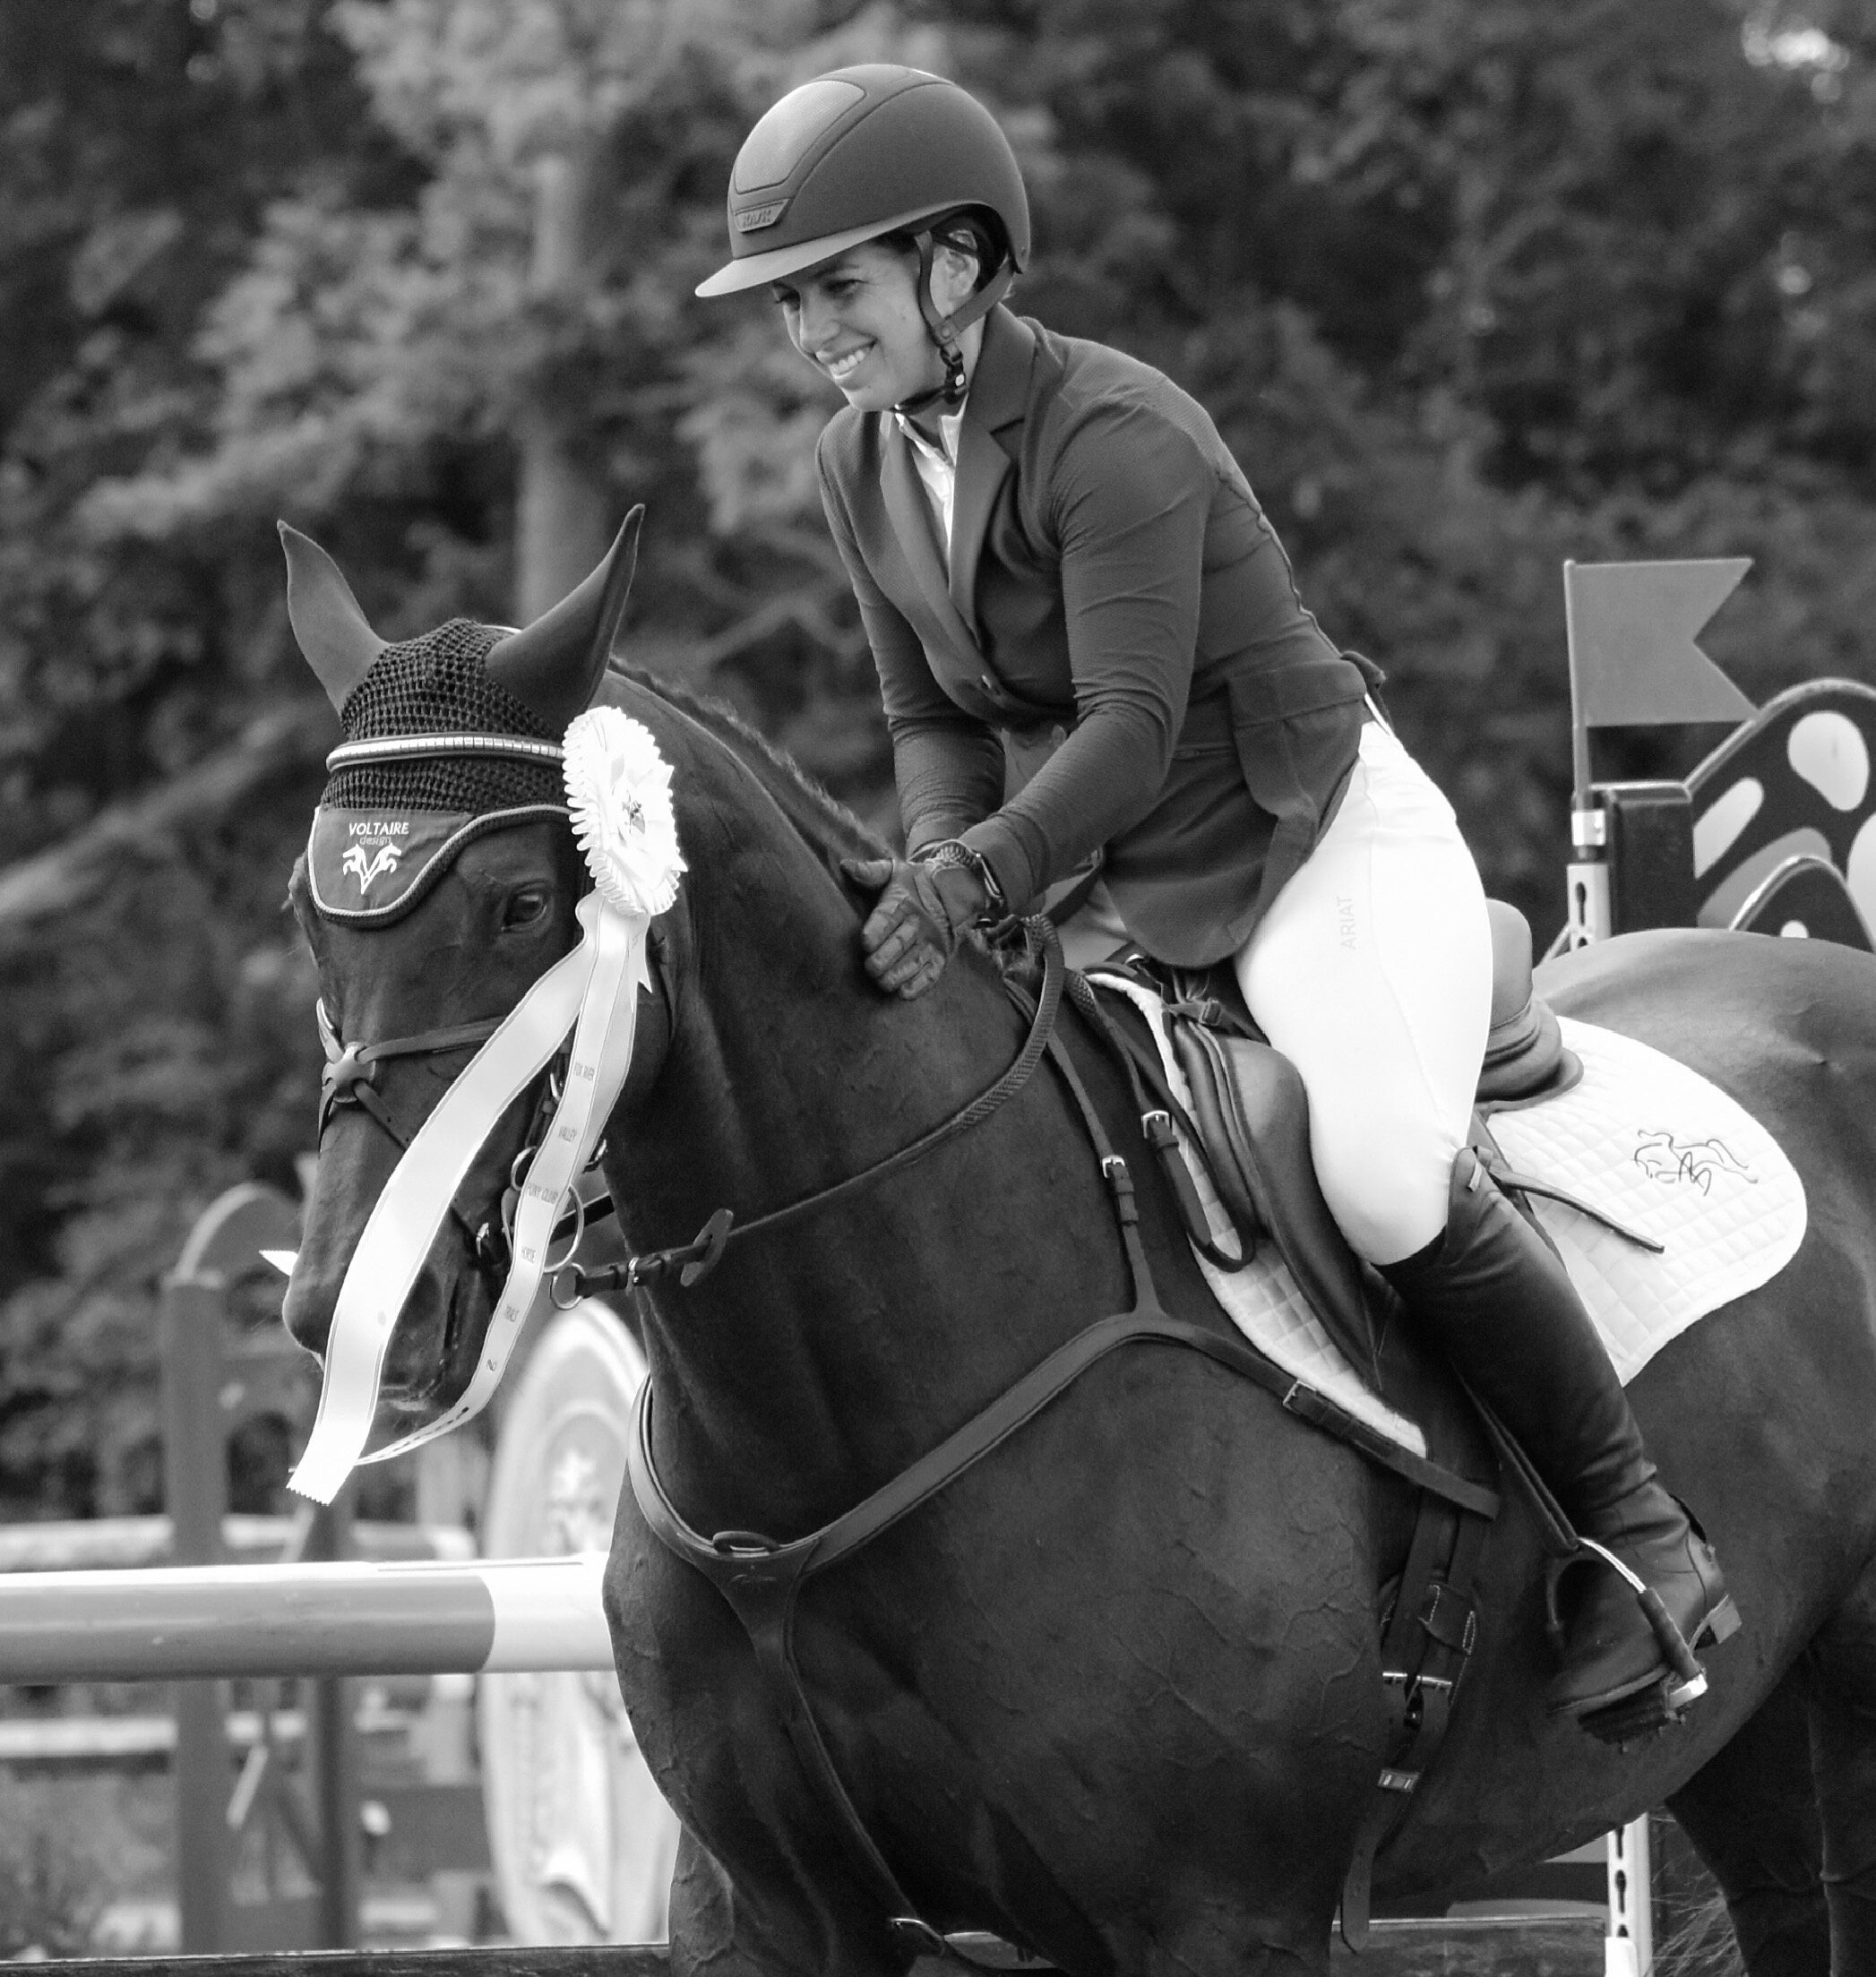 Eventing: Monochrome Emily DiMaria, A professional horse trials rider and trainer based in Michigan. 2100x2210 HD Wallpaper.